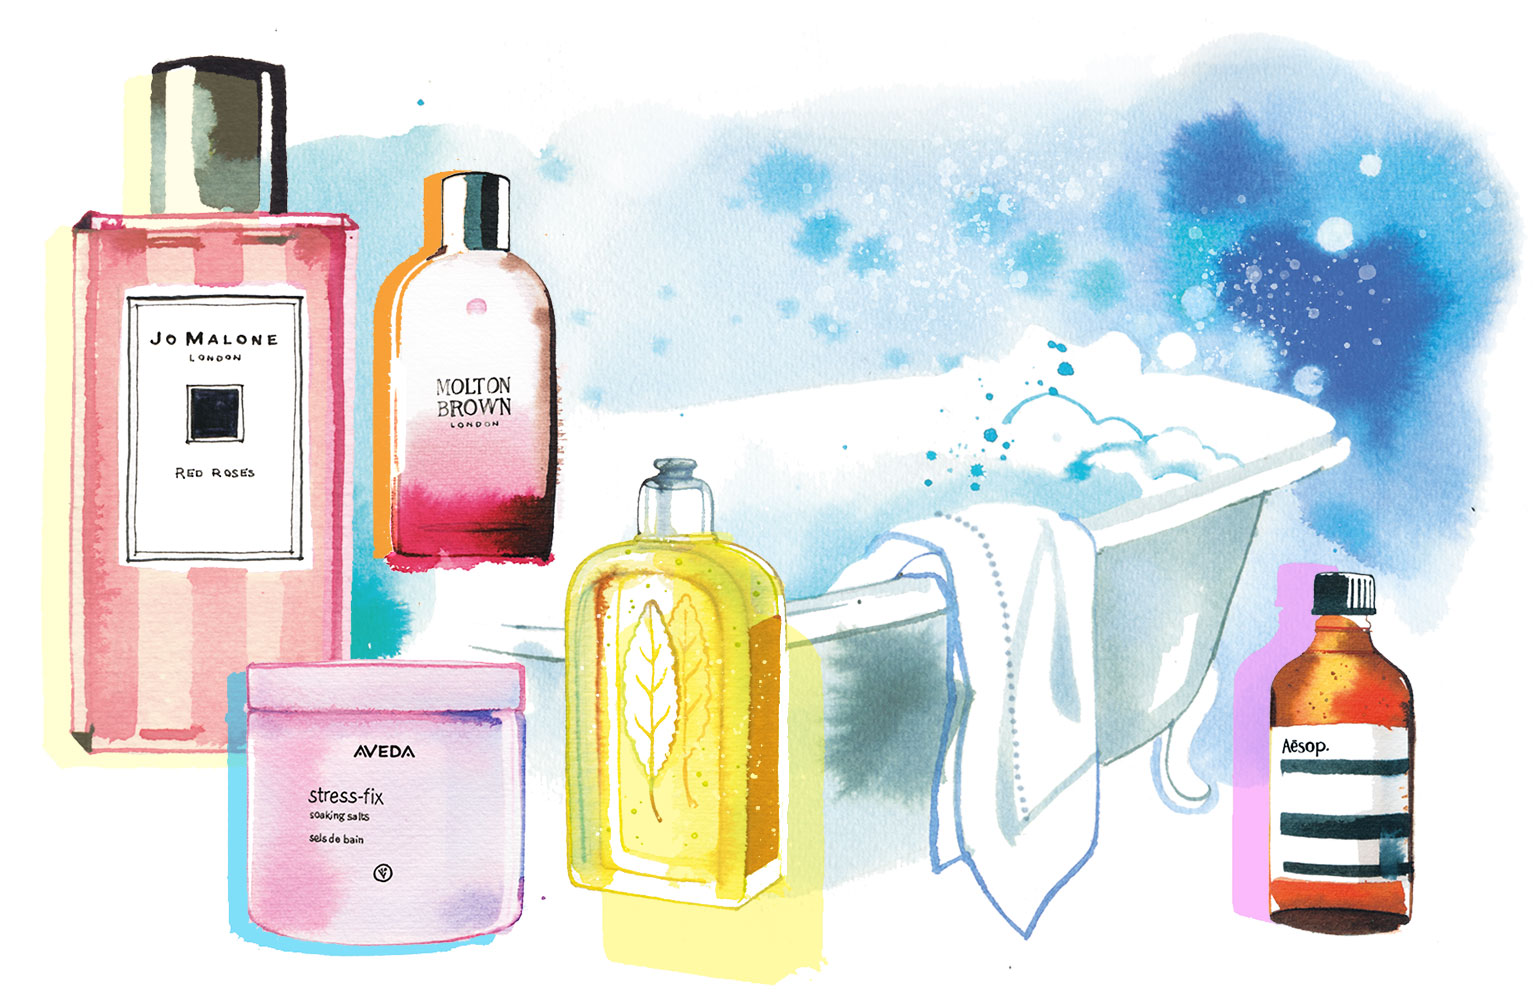 Illustration of Bathtub with Beauty Products and Shower Gels - Schweizer Familie, 2017